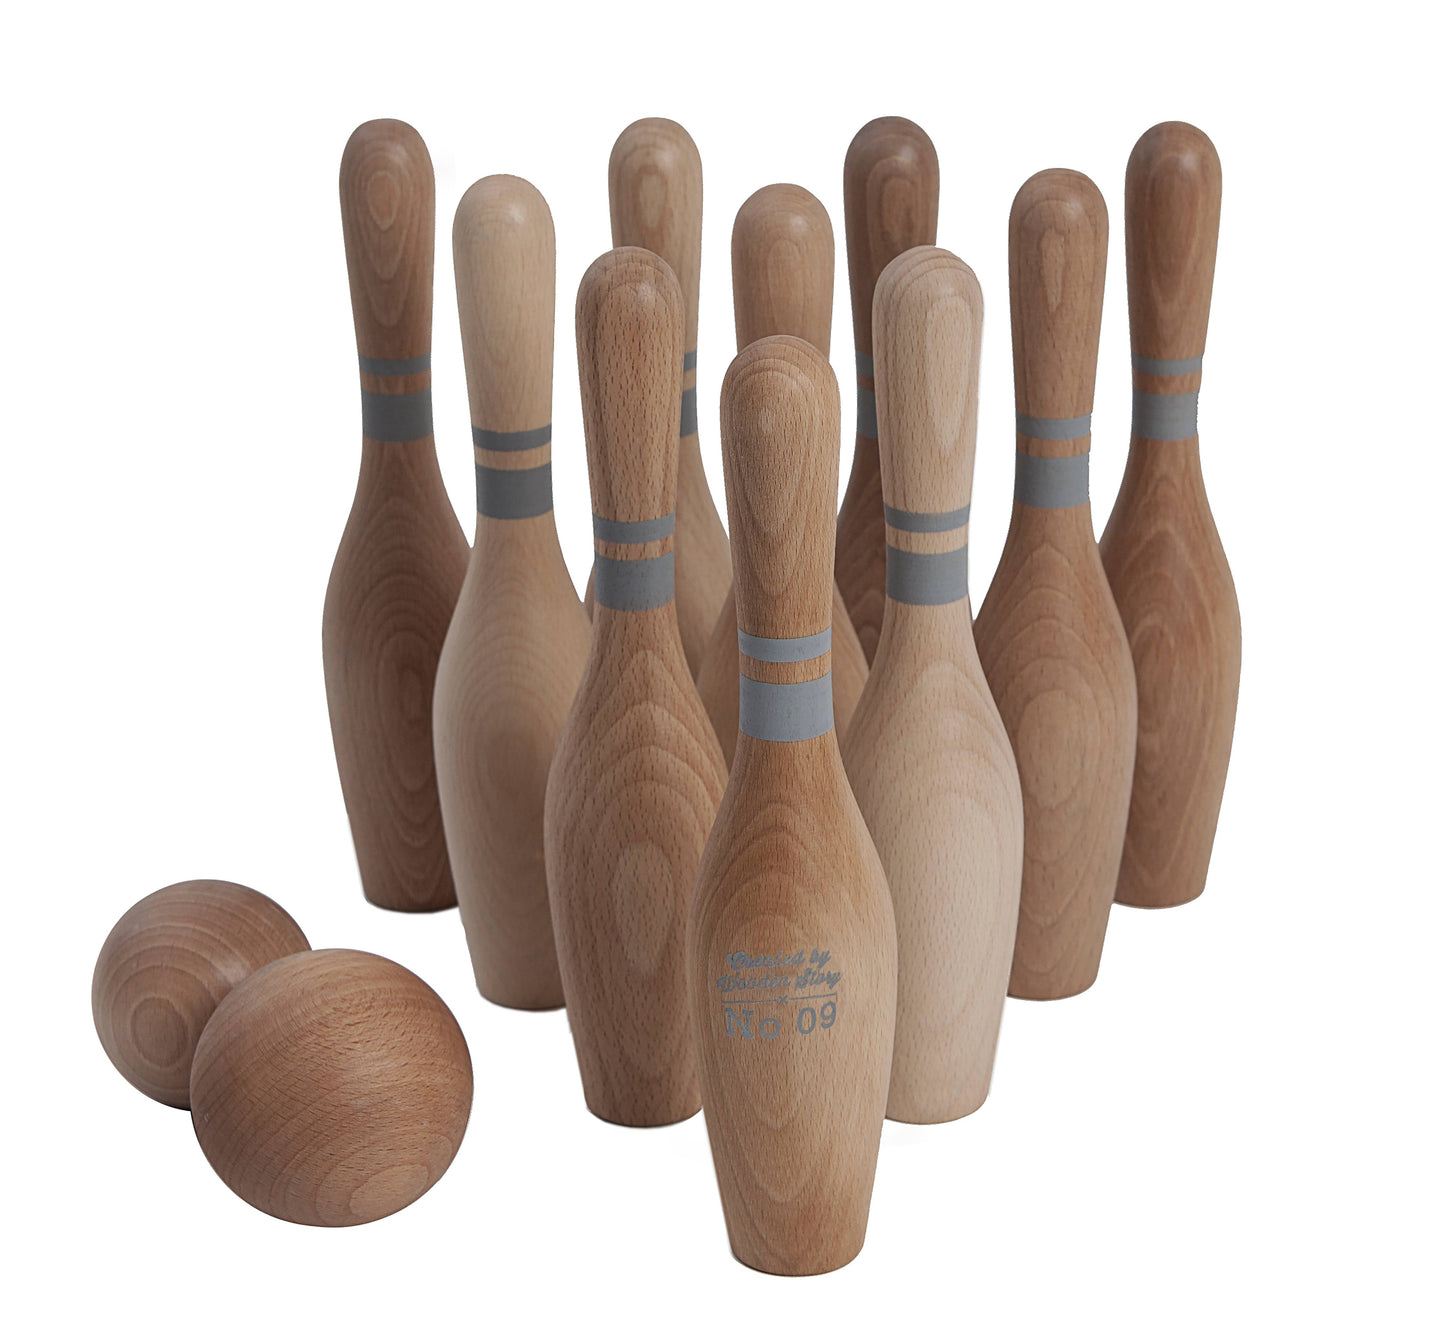 Wooden toy bowling set with ten pins and two balls